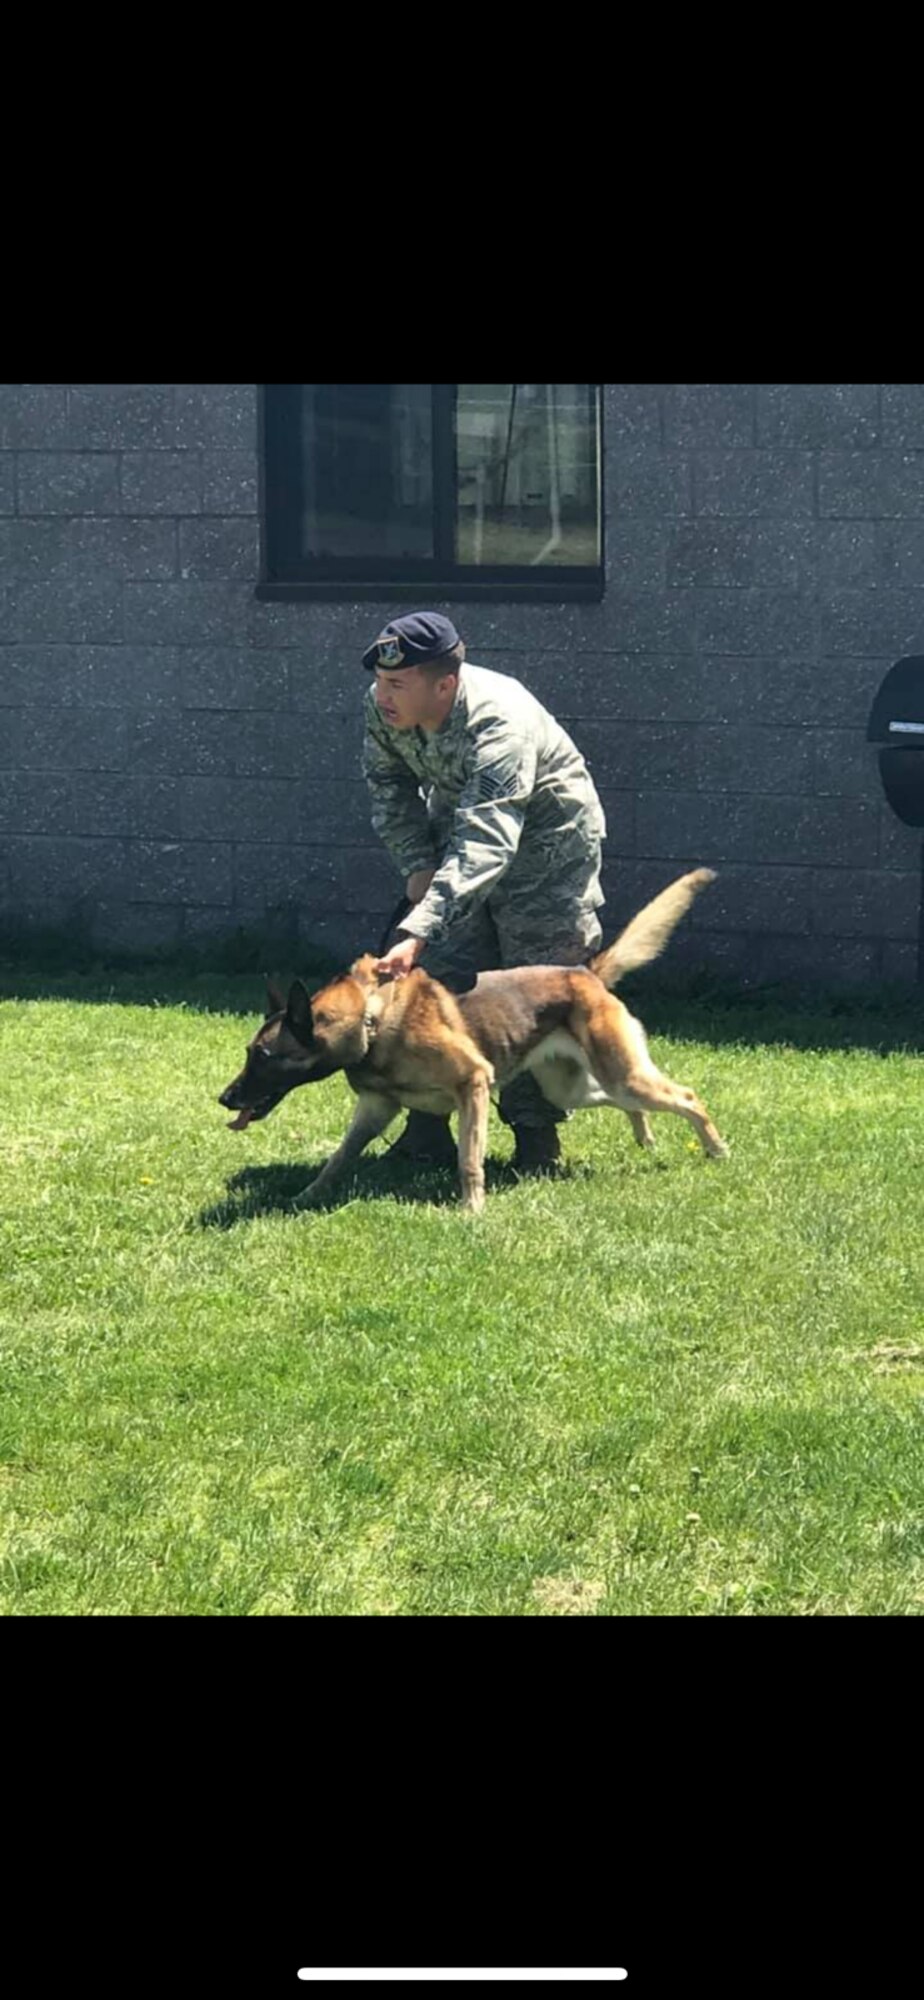 U.S. Air Force Staff Sgt. Nicholas Gray, 325th Security Forces Squadron Military Working Dog handler assigned to Tyndall Air Force Base, Fl., trains with his K-9, Kira, on Joint Base McGuire-Dix-Lakehurst, N.J. (U.S. Air Force courtesy photo)